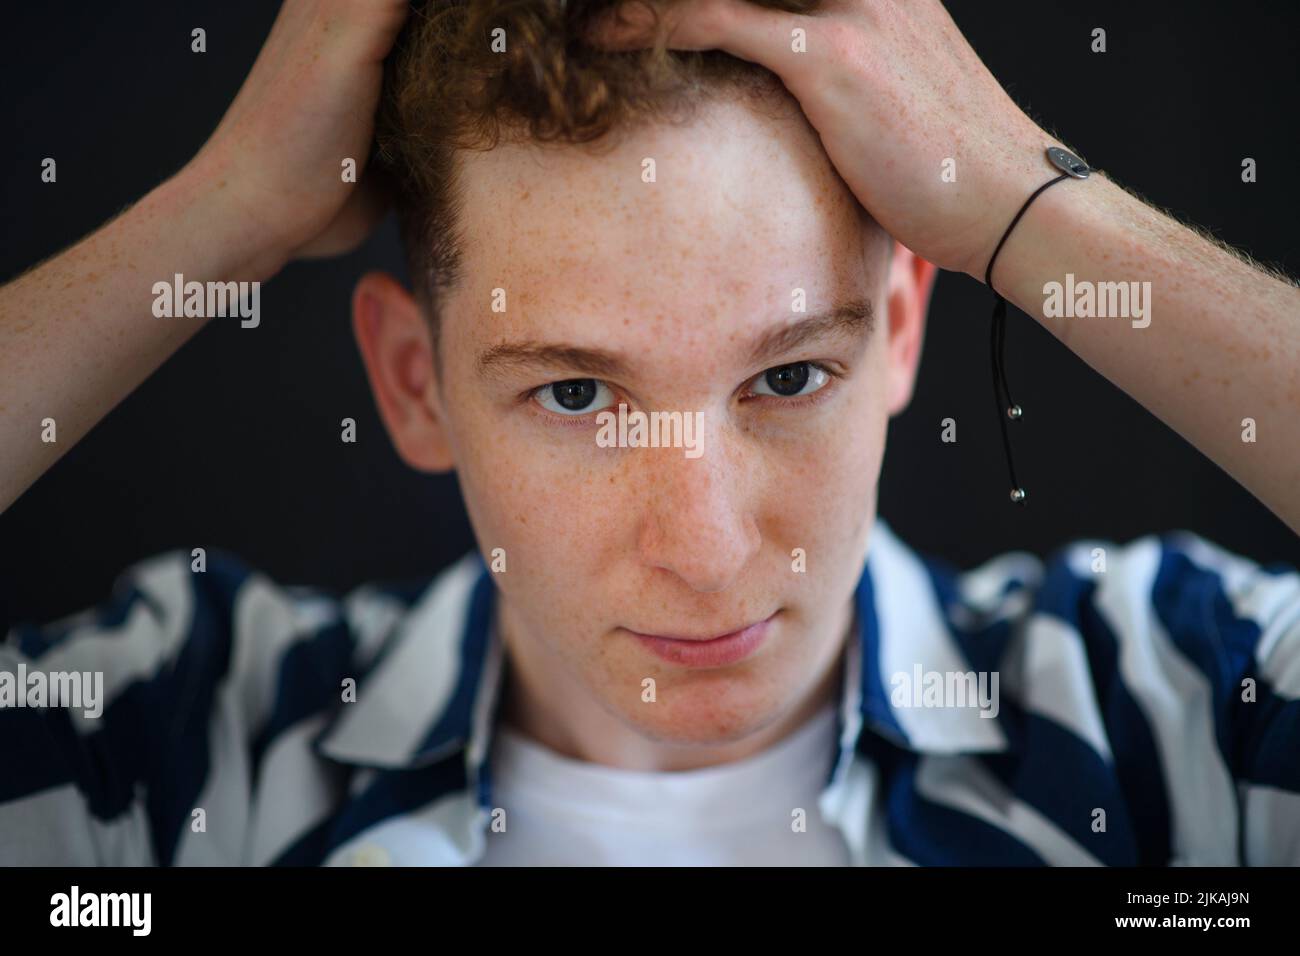 Portrait of thoughtful handsome young man with ginger hair and freckles looking away on black background, close-up Stock Photo